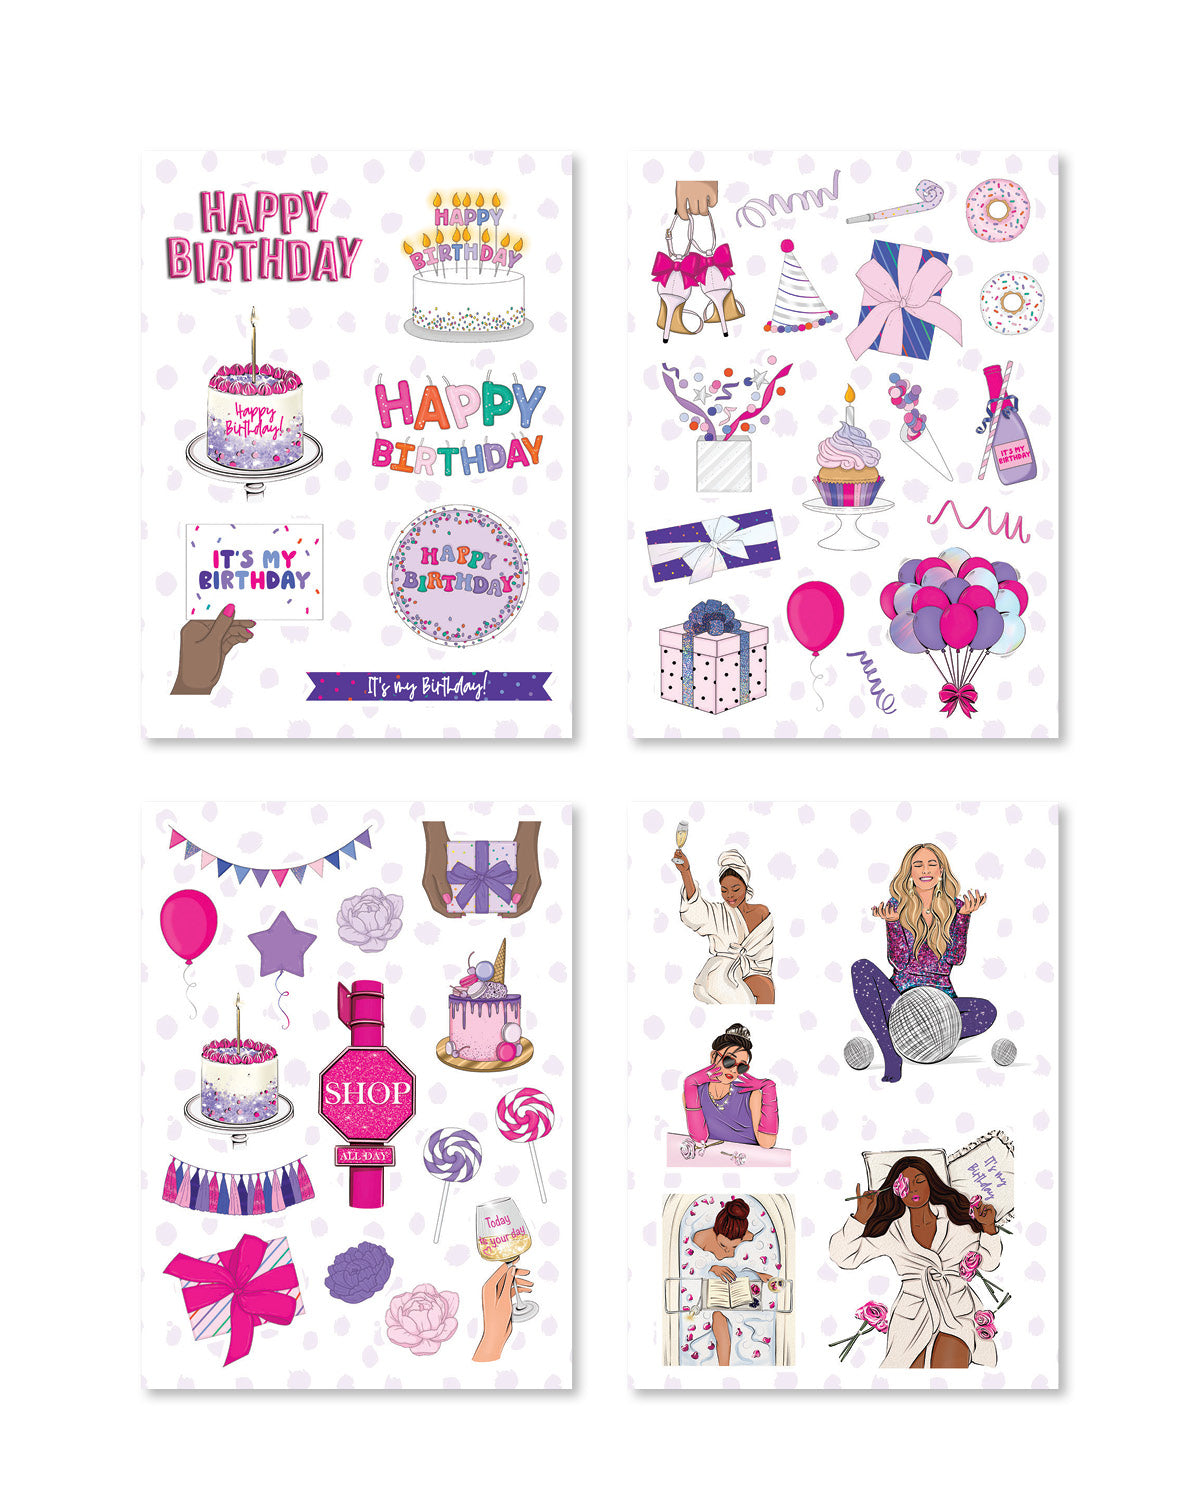 It's My Birthday Planner Sticker Pack - Shop Rongrong - Rongrong DeVoe